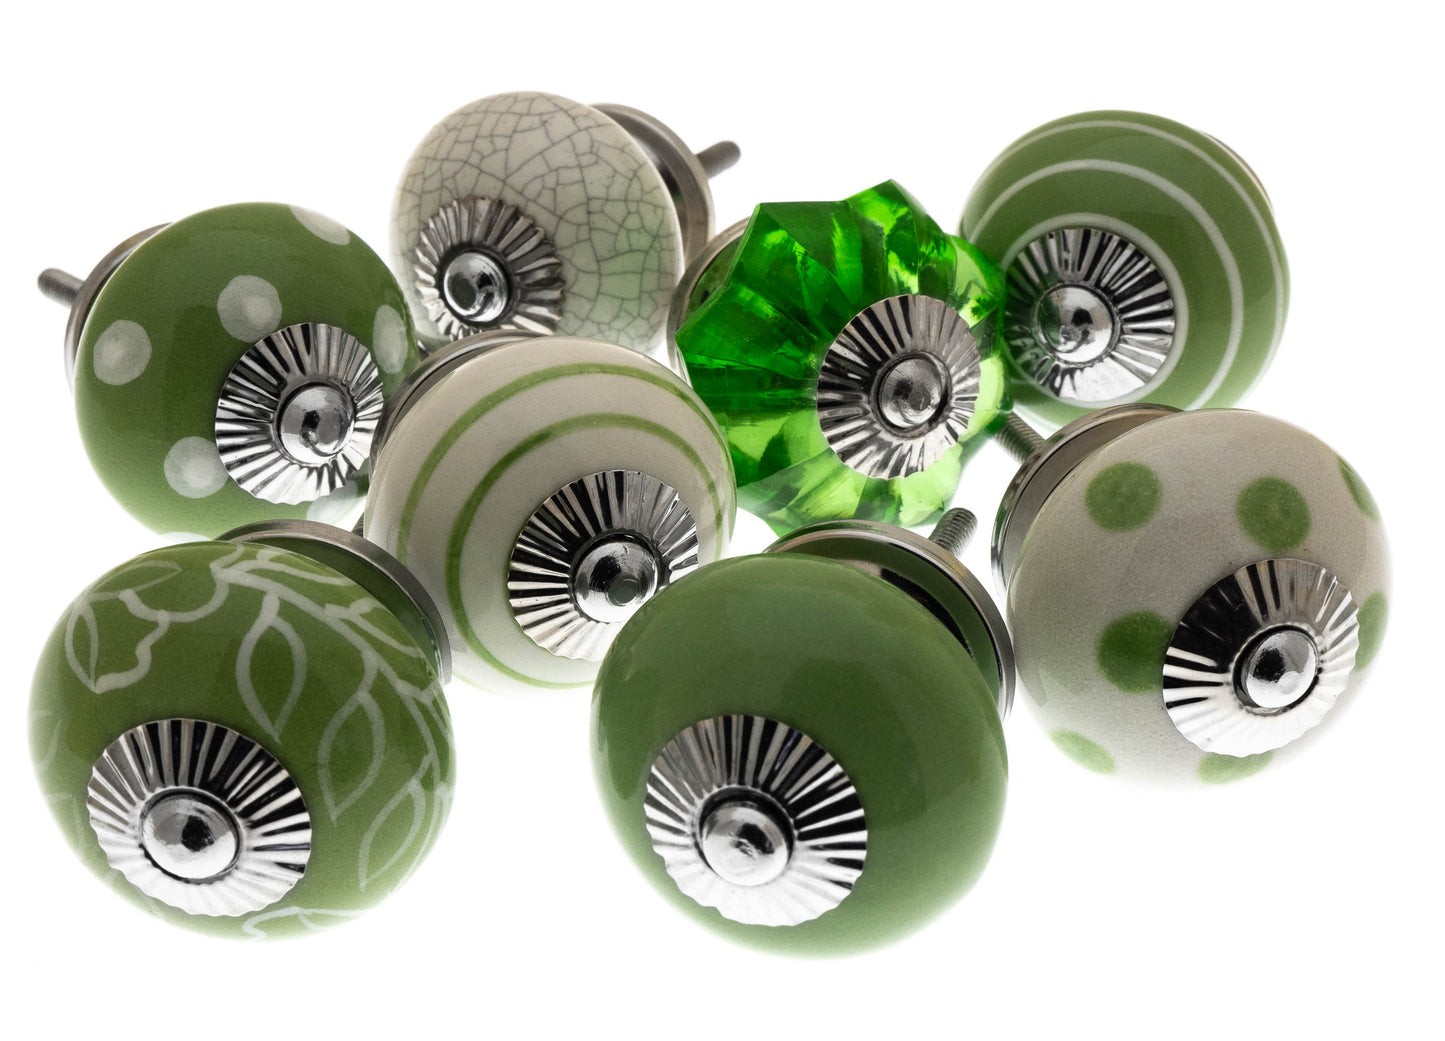 Ceramic and Glass Cupboard Knobs in Bright Green Designs - Set of 8